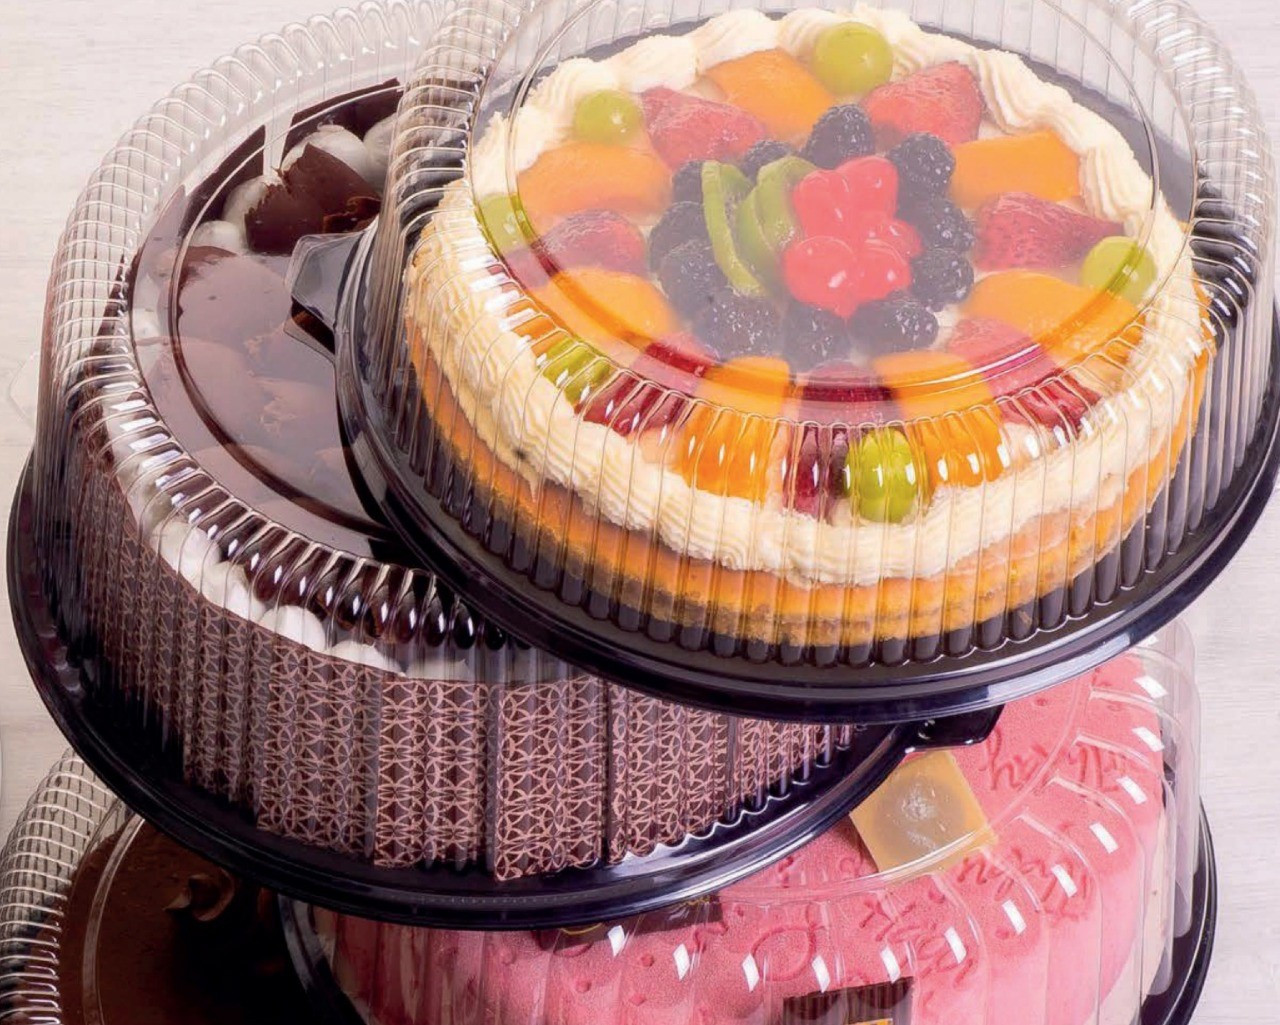 Cake Containers | 8 inch Cake Container for easy Cake Display